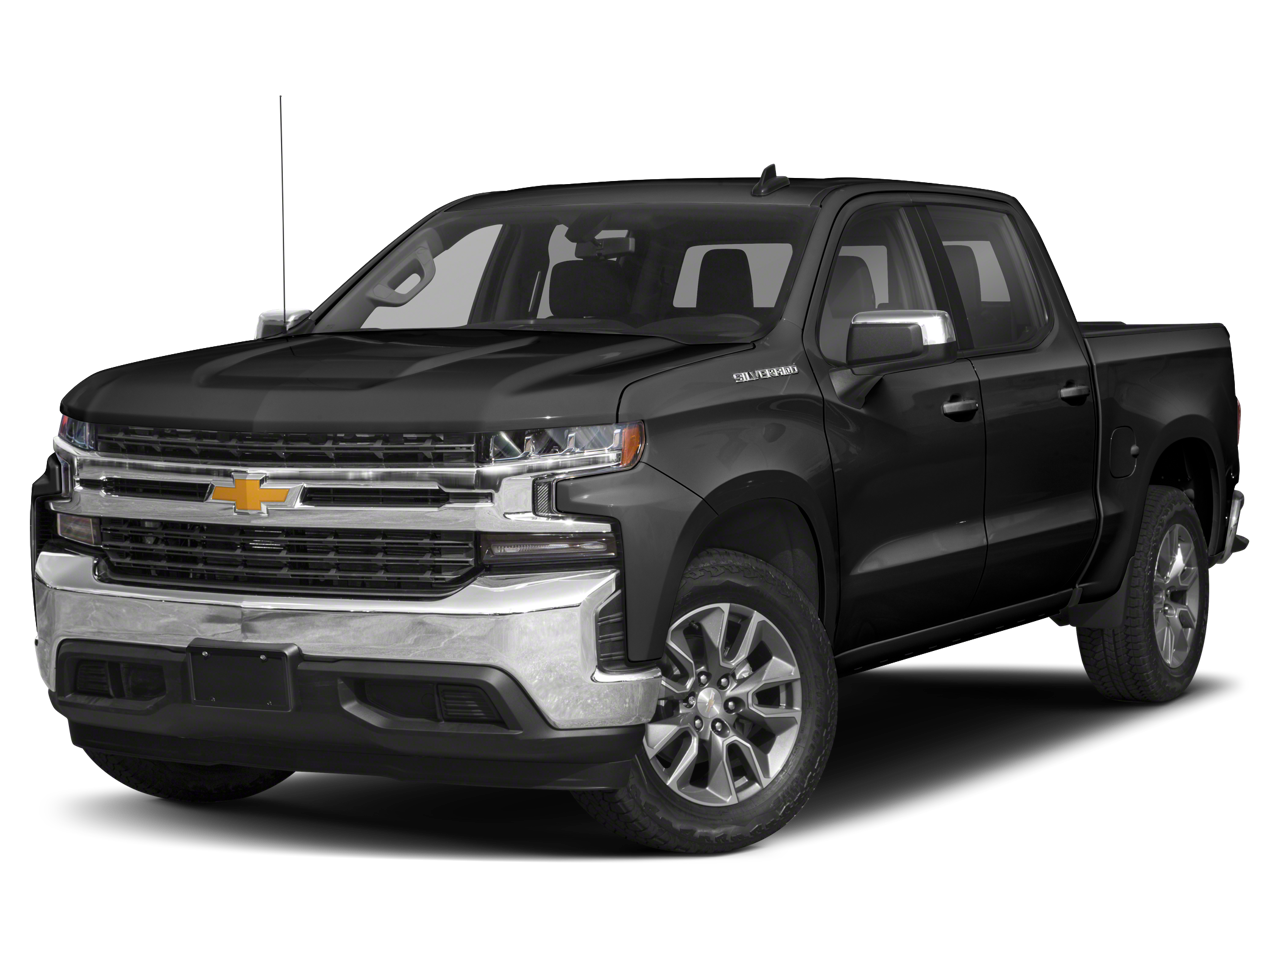 Used 2021 Chevrolet Silverado 1500 RST with VIN 1GCUYEED0MZ361135 for sale in Glenwood, Minnesota